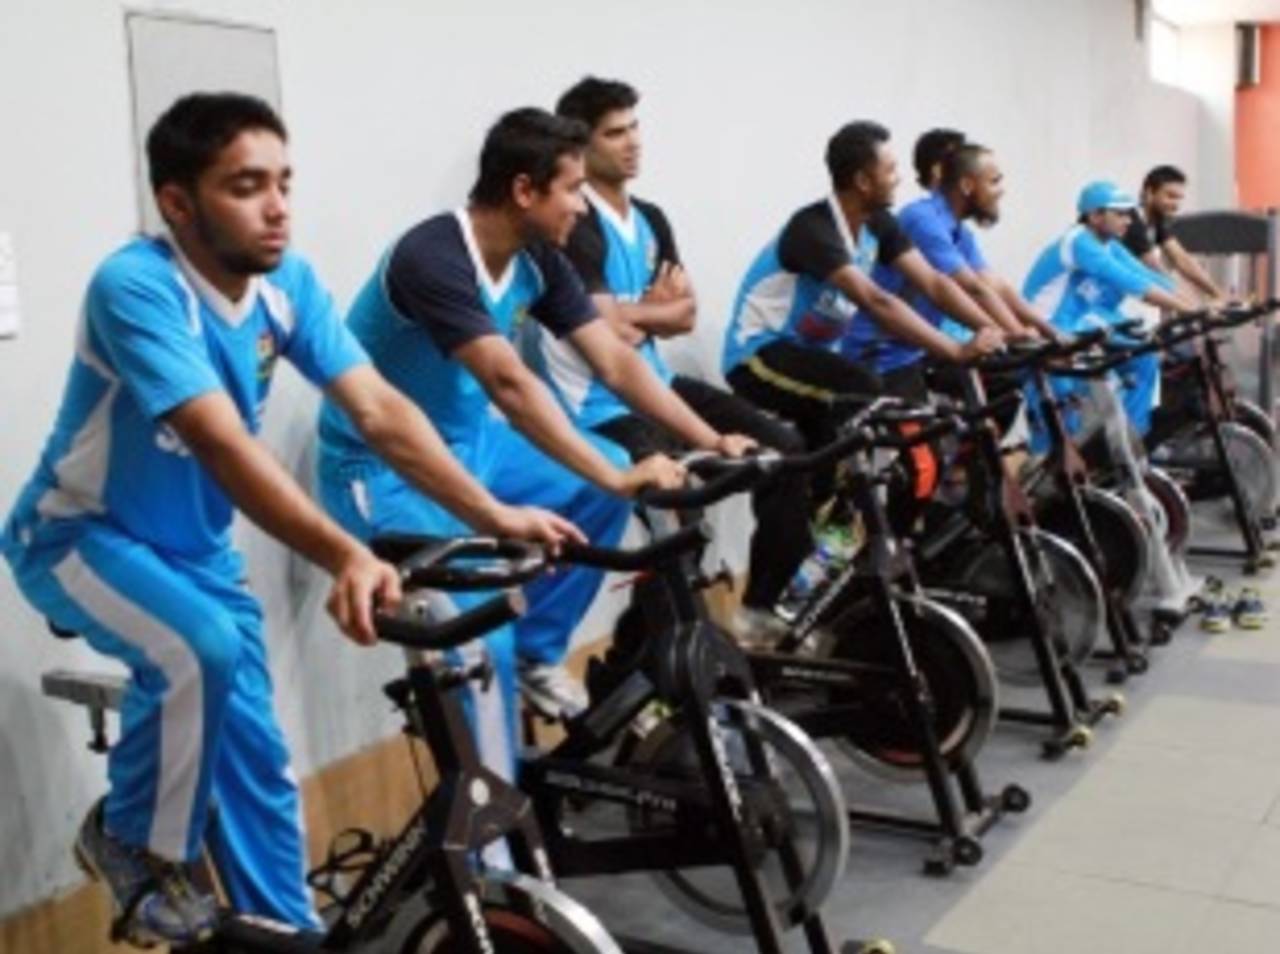 The Bangladesh team undergoes a fitness test ahead of their home series against New Zealand, Dhaka, June 13, 2013